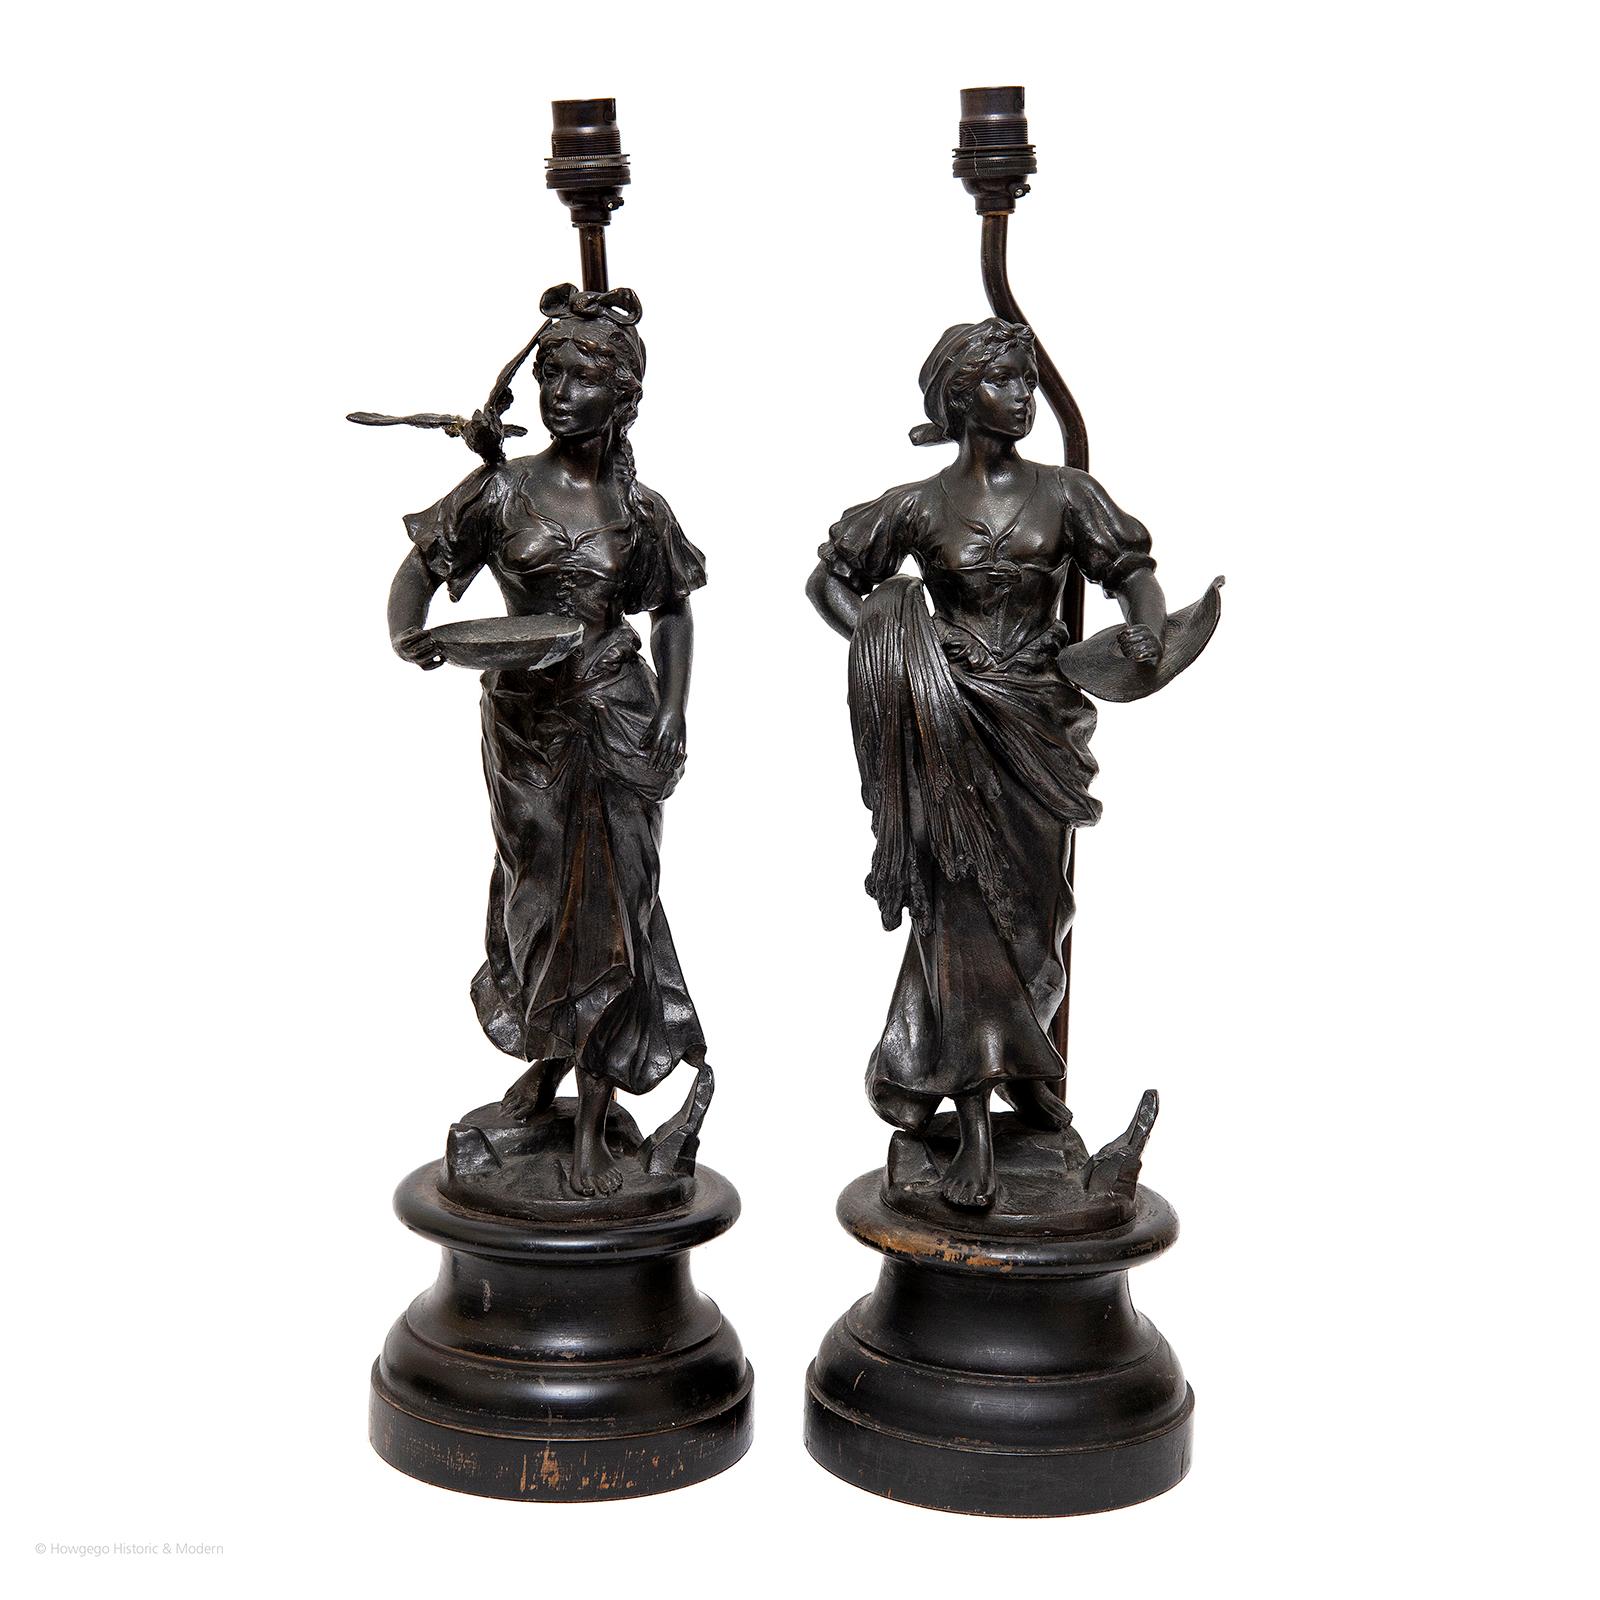 A fine pair of 19th century, spelter, dark bronzed, shepherdesses in the pastoral and romantic styles upcycled into 21” high table lamps

These fine sculptures introduce a classically inspired pastoral atmosphere and charm into the interior
The